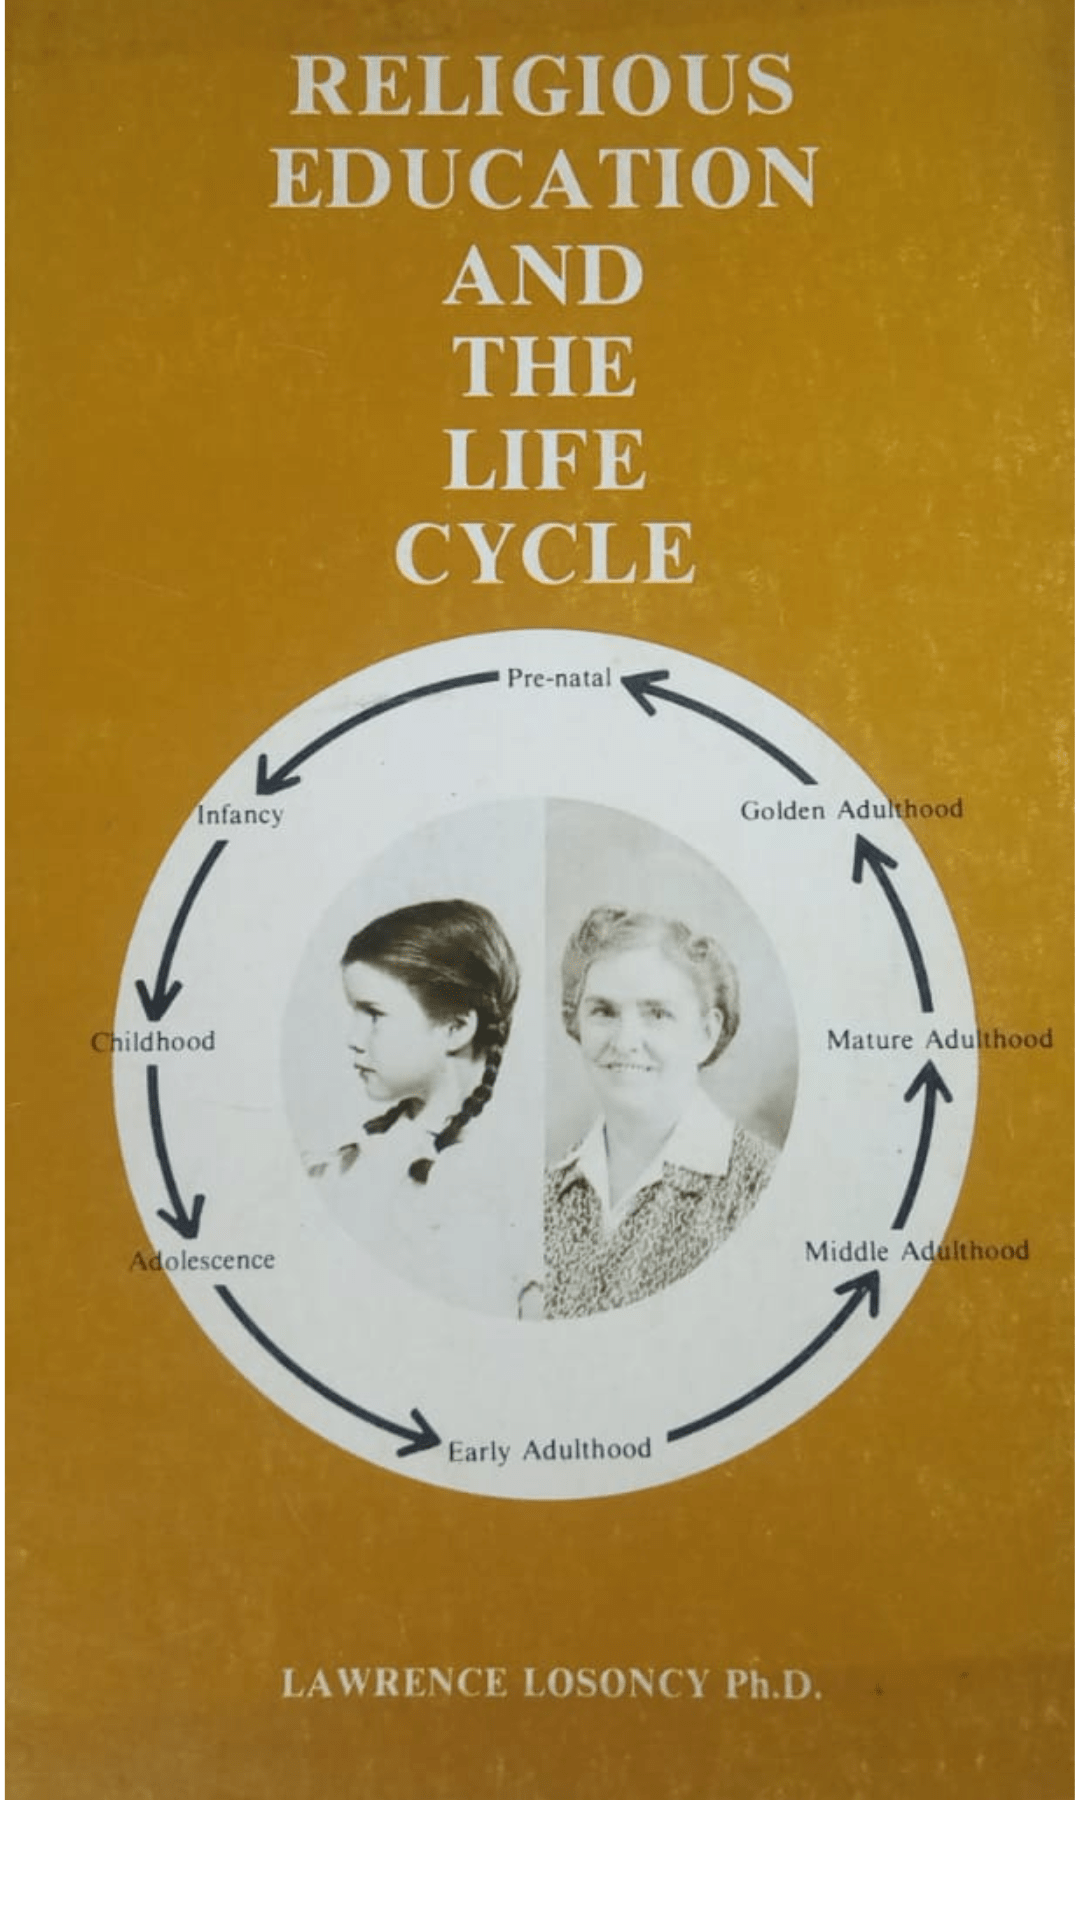 Religious education and the life cycle